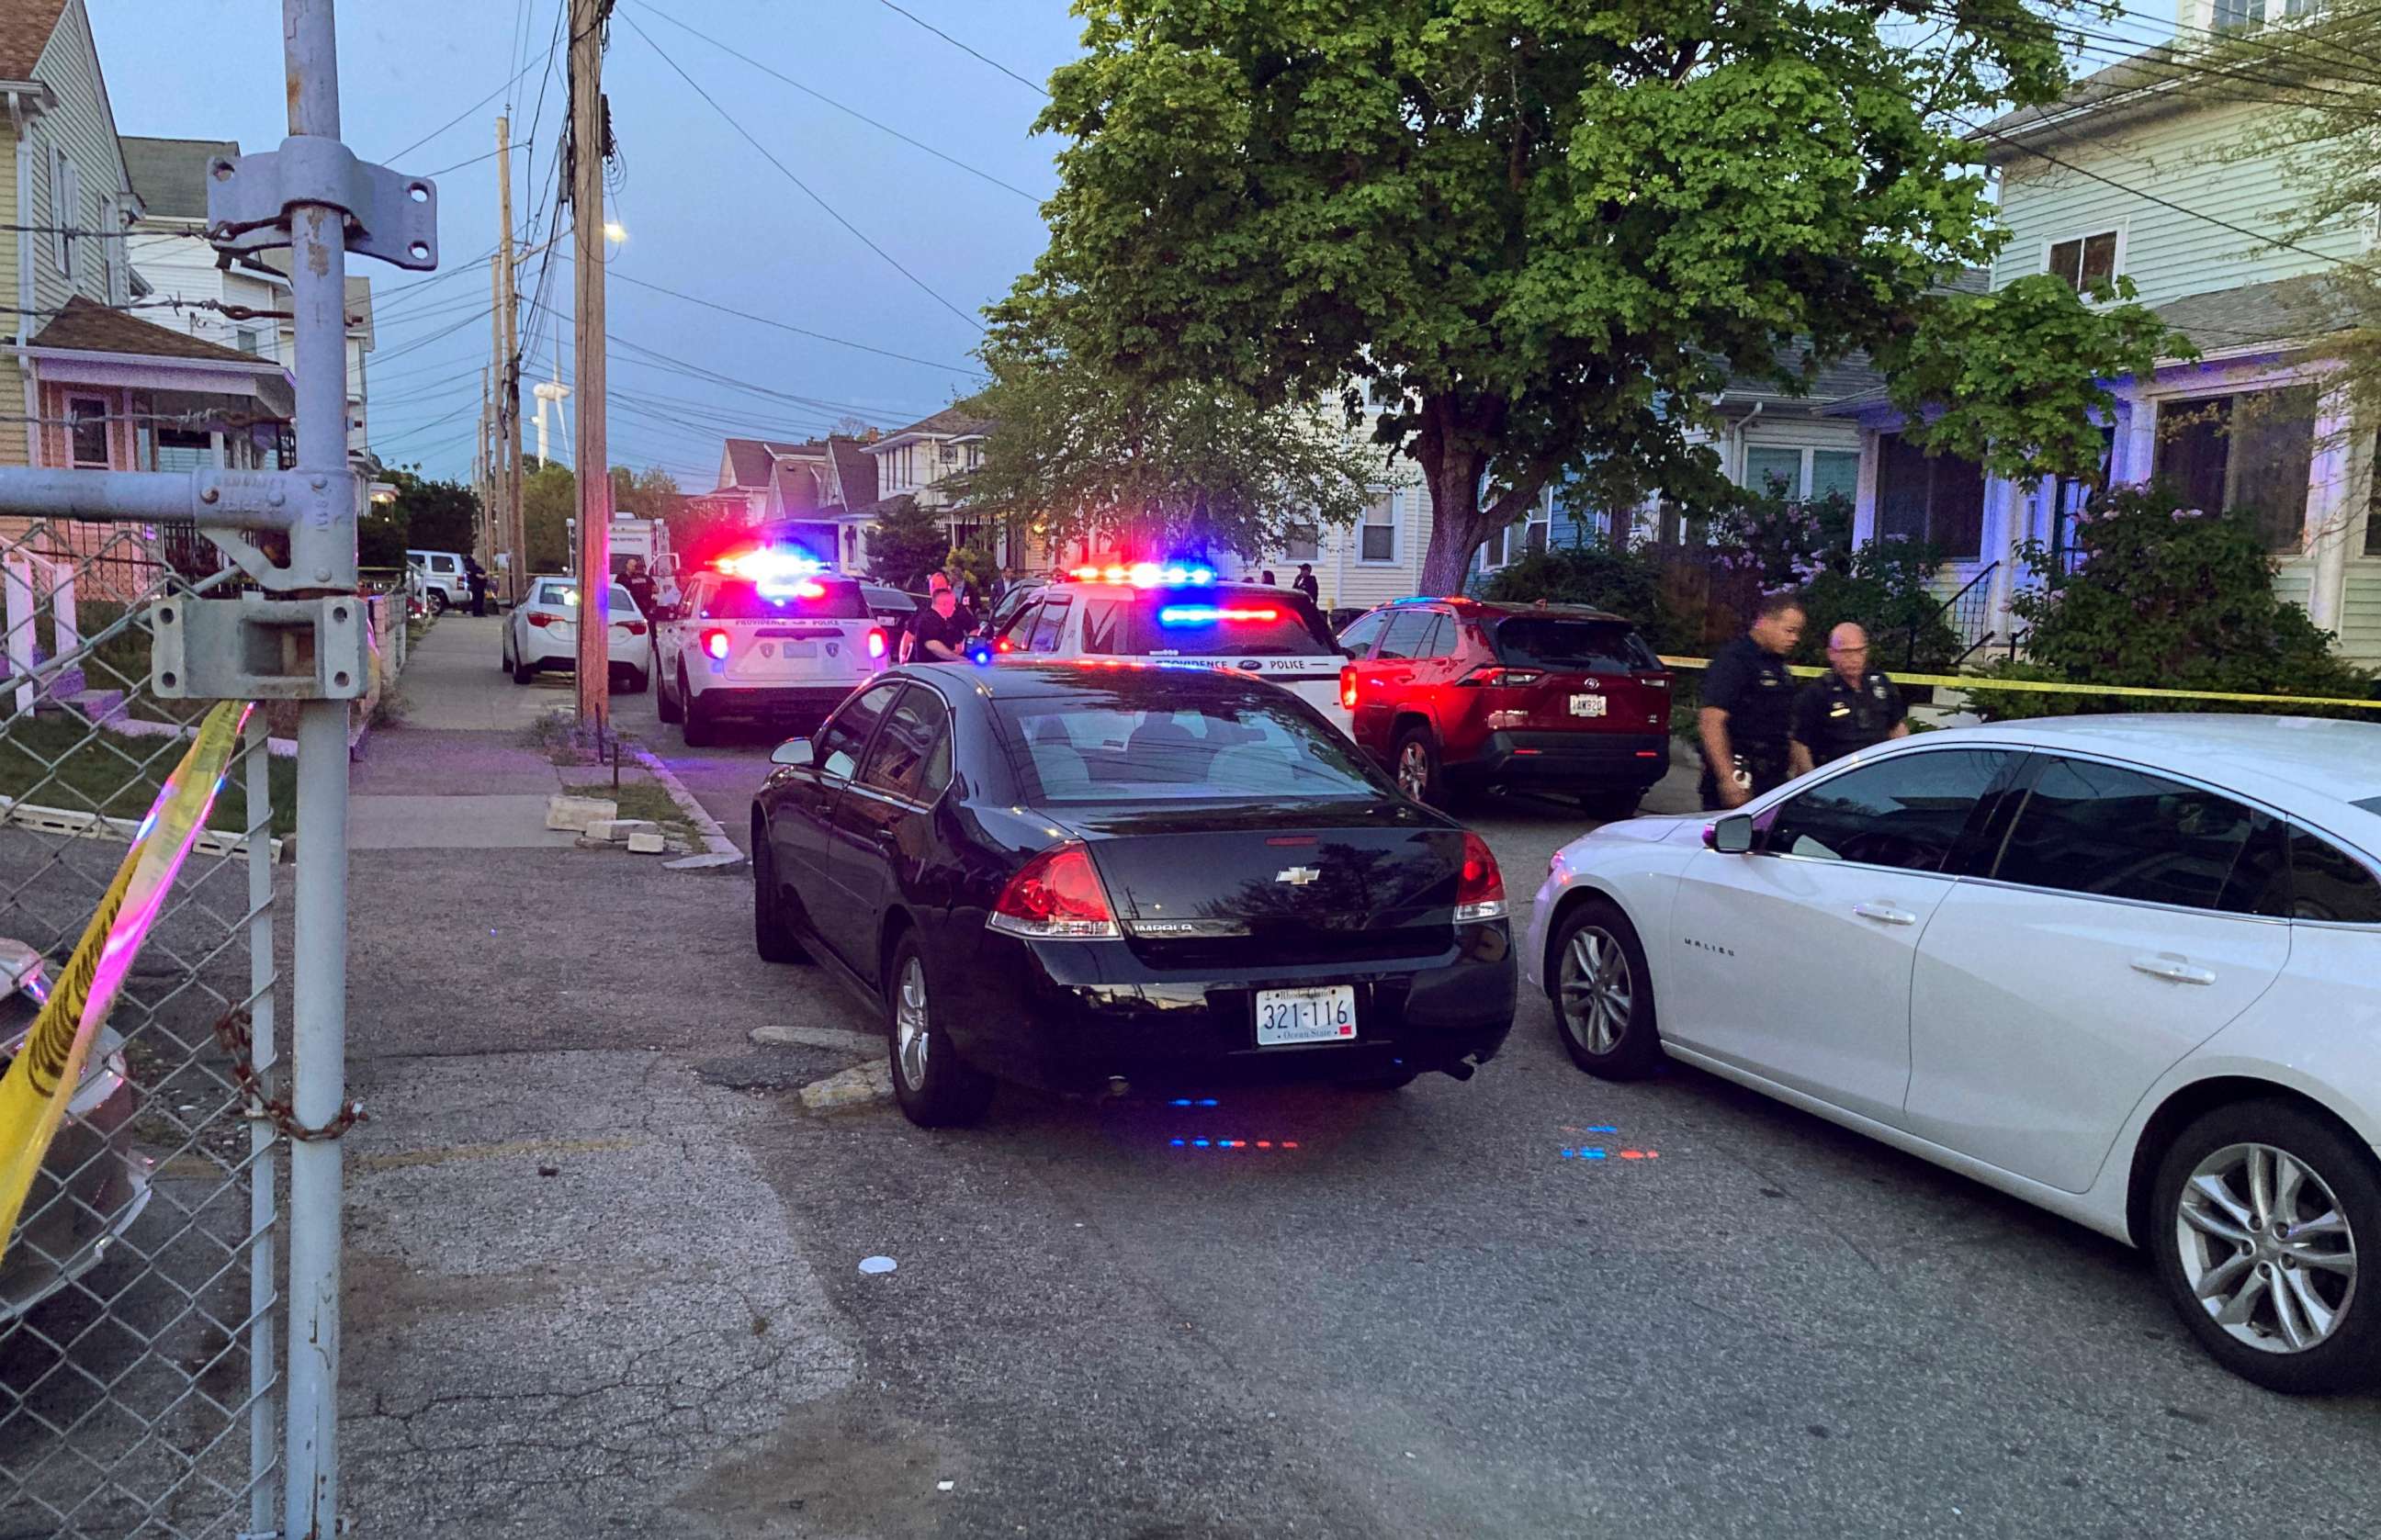 PHOTO: Police respond to the scene where at least nine people were wounded in a shooting outside a home in Providence, Rhode Island, on May 13, 2021.